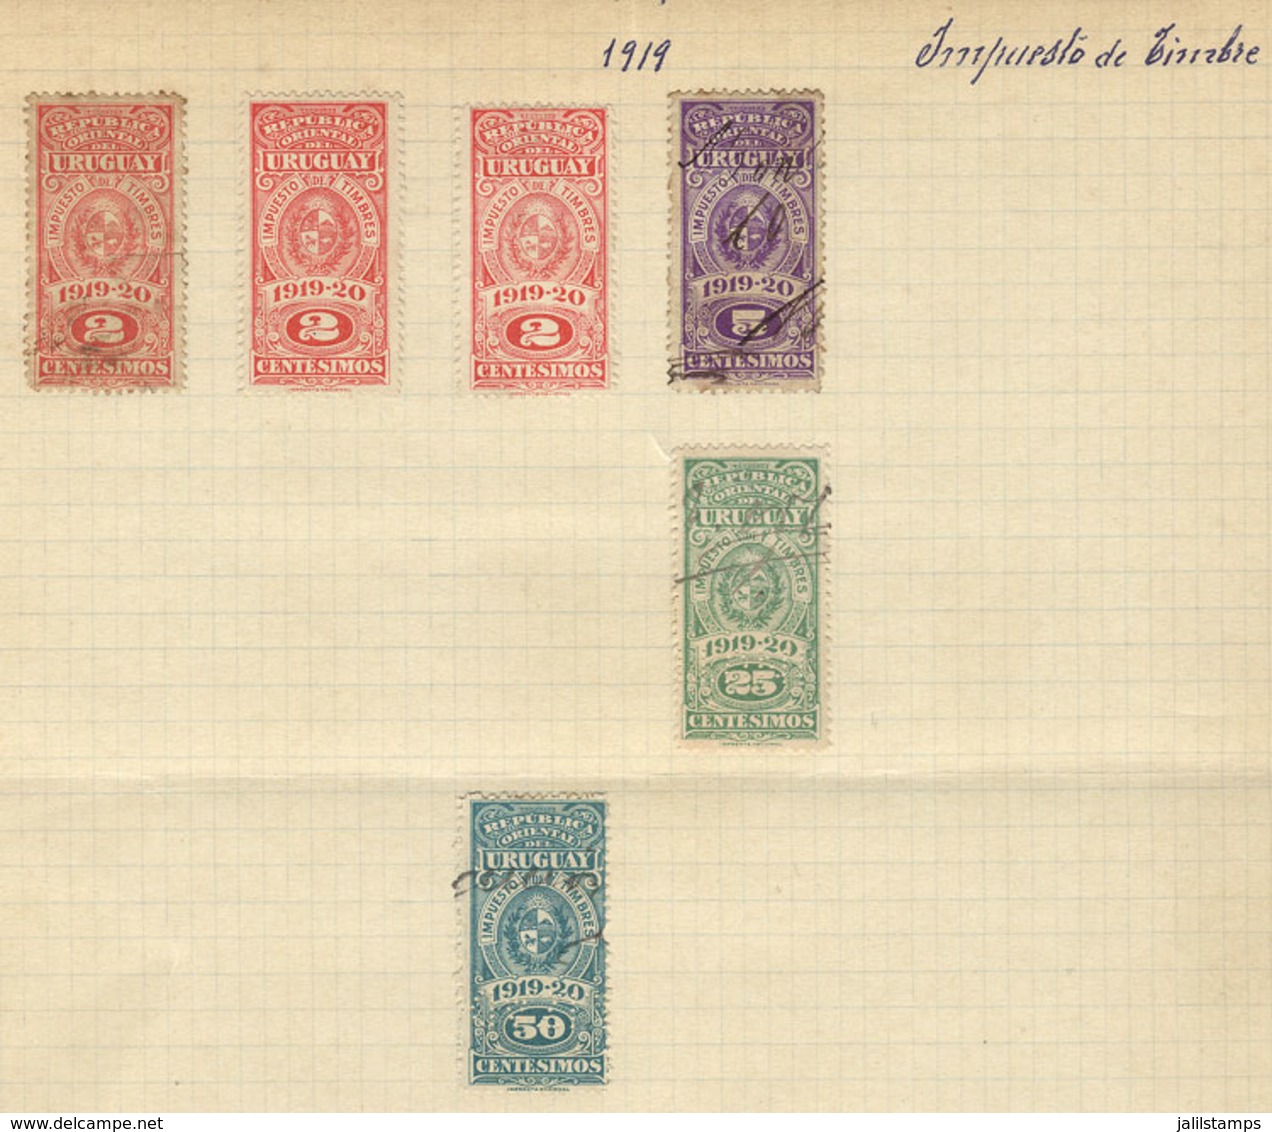 URUGUAY: IMPUESTO DE TIMBRE: 35 Stamps On Pages Of An Old Collection, Fine General Quality, Interesting Lot! - Uruguay